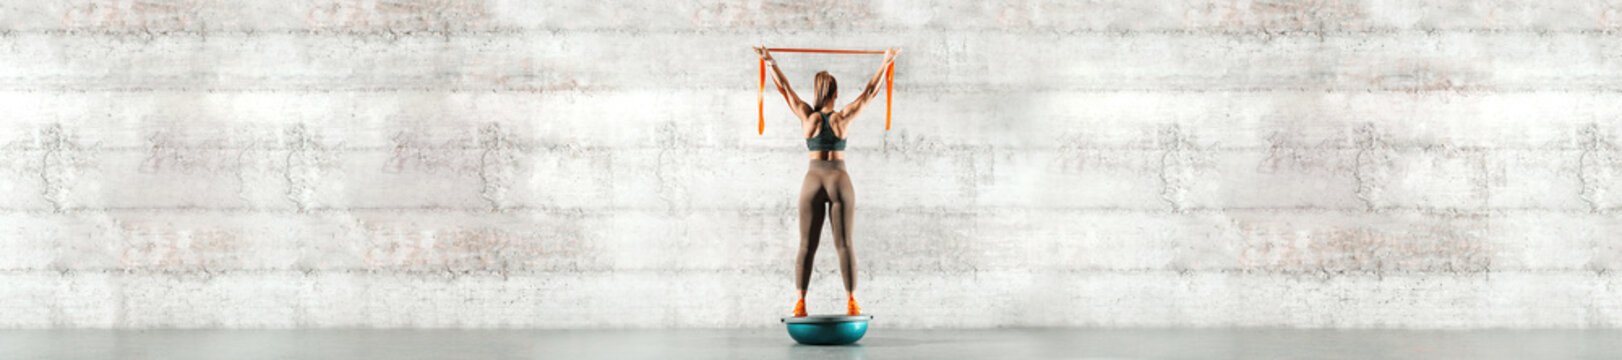 Full length of sporty woman standing on bosu ball and holding ribbon. Back turned, in background gray wall, copy space.